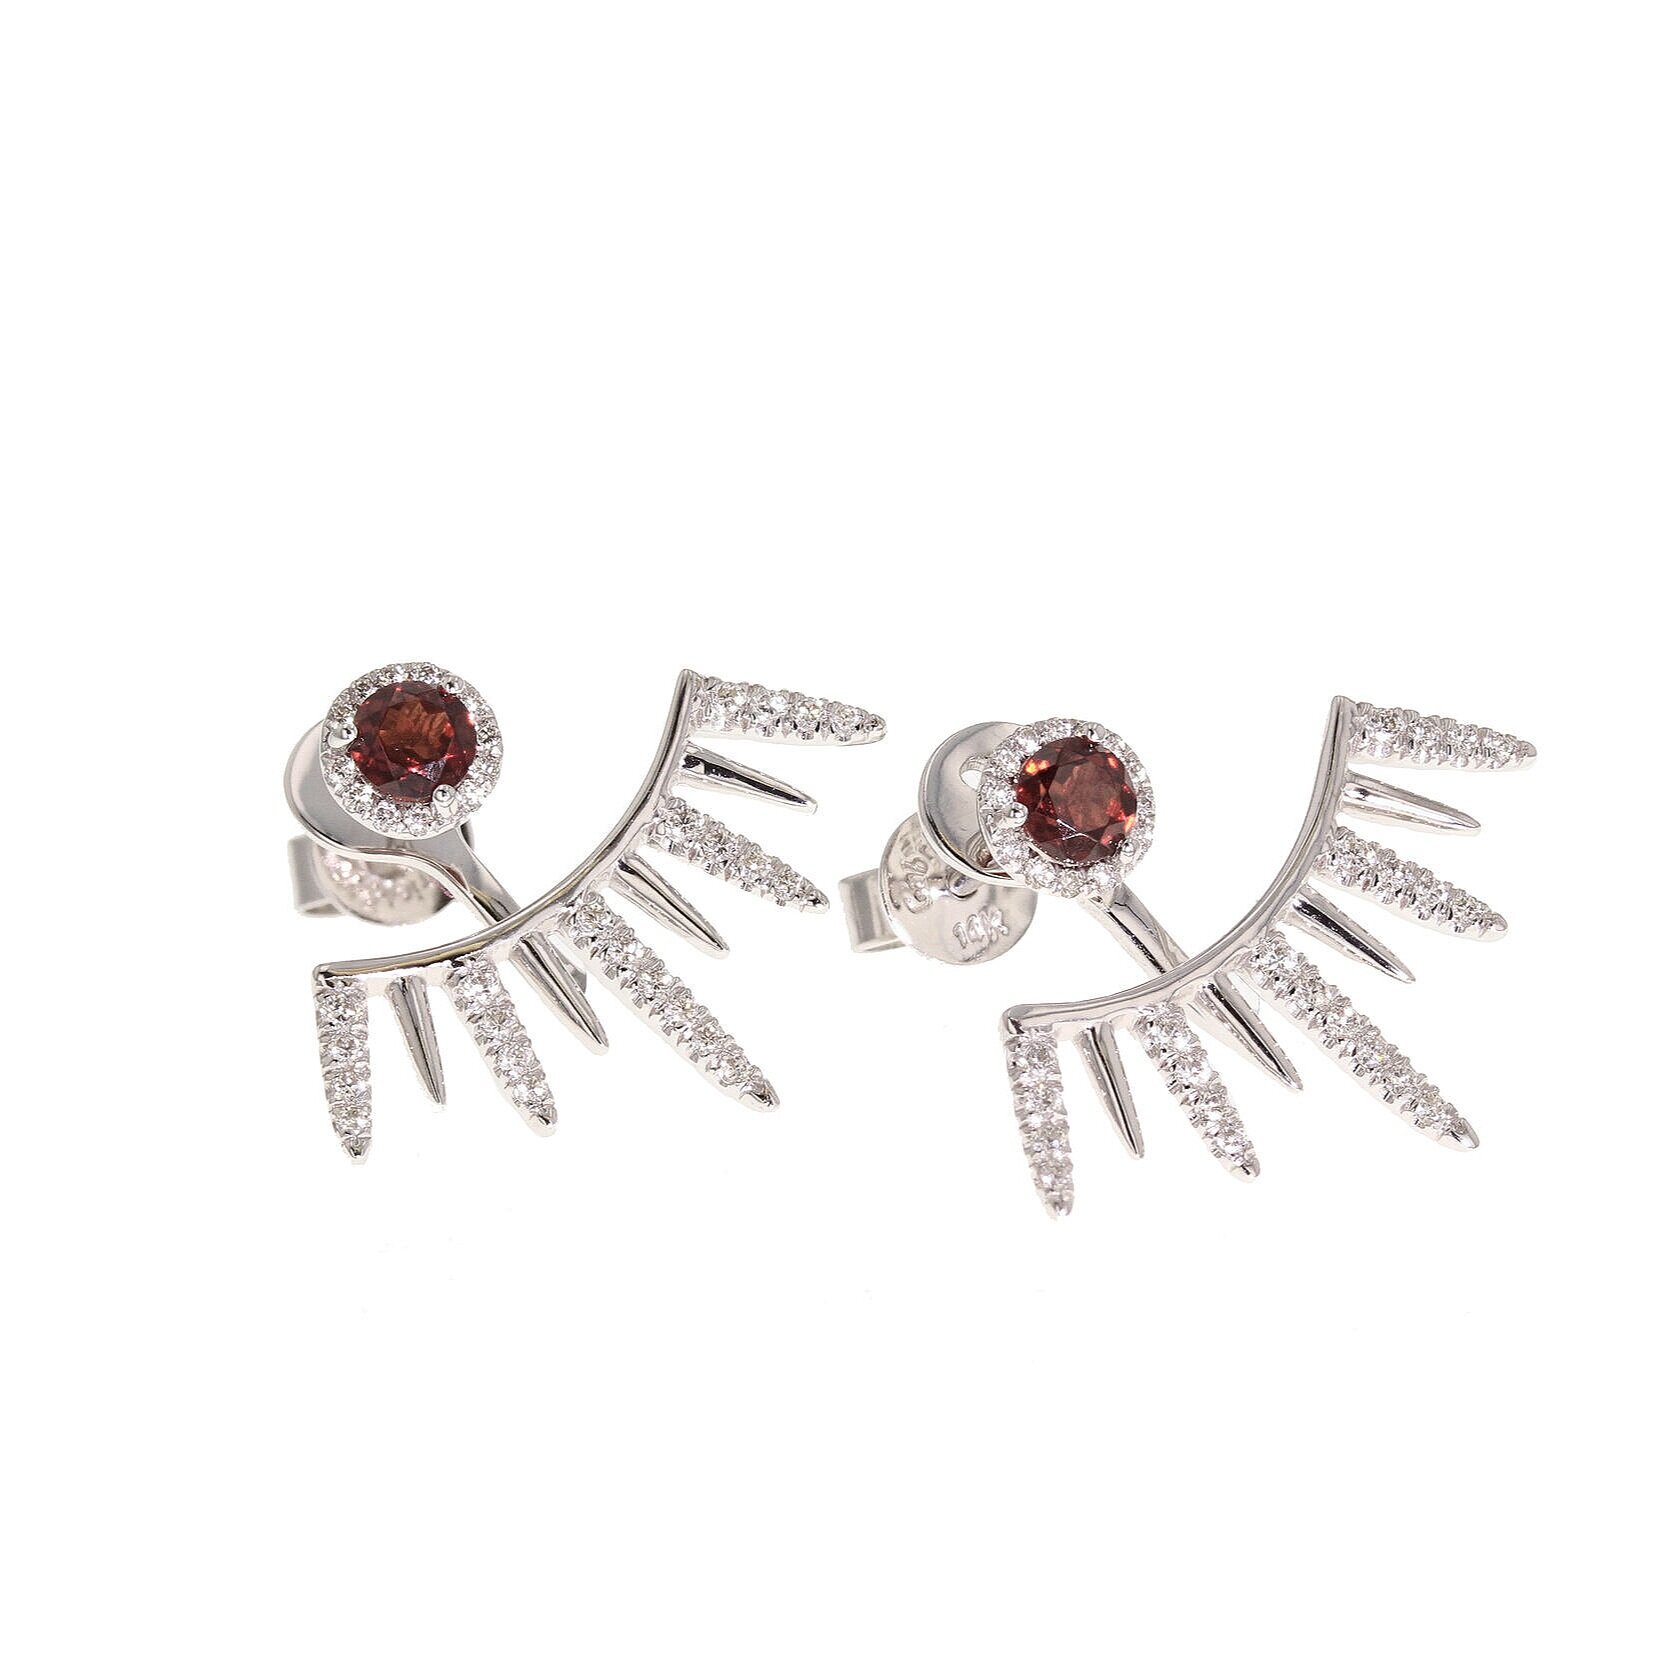 White gold Garnet and Diamond Pavé earring studs with "Sun Rays" earring jackets. $1995